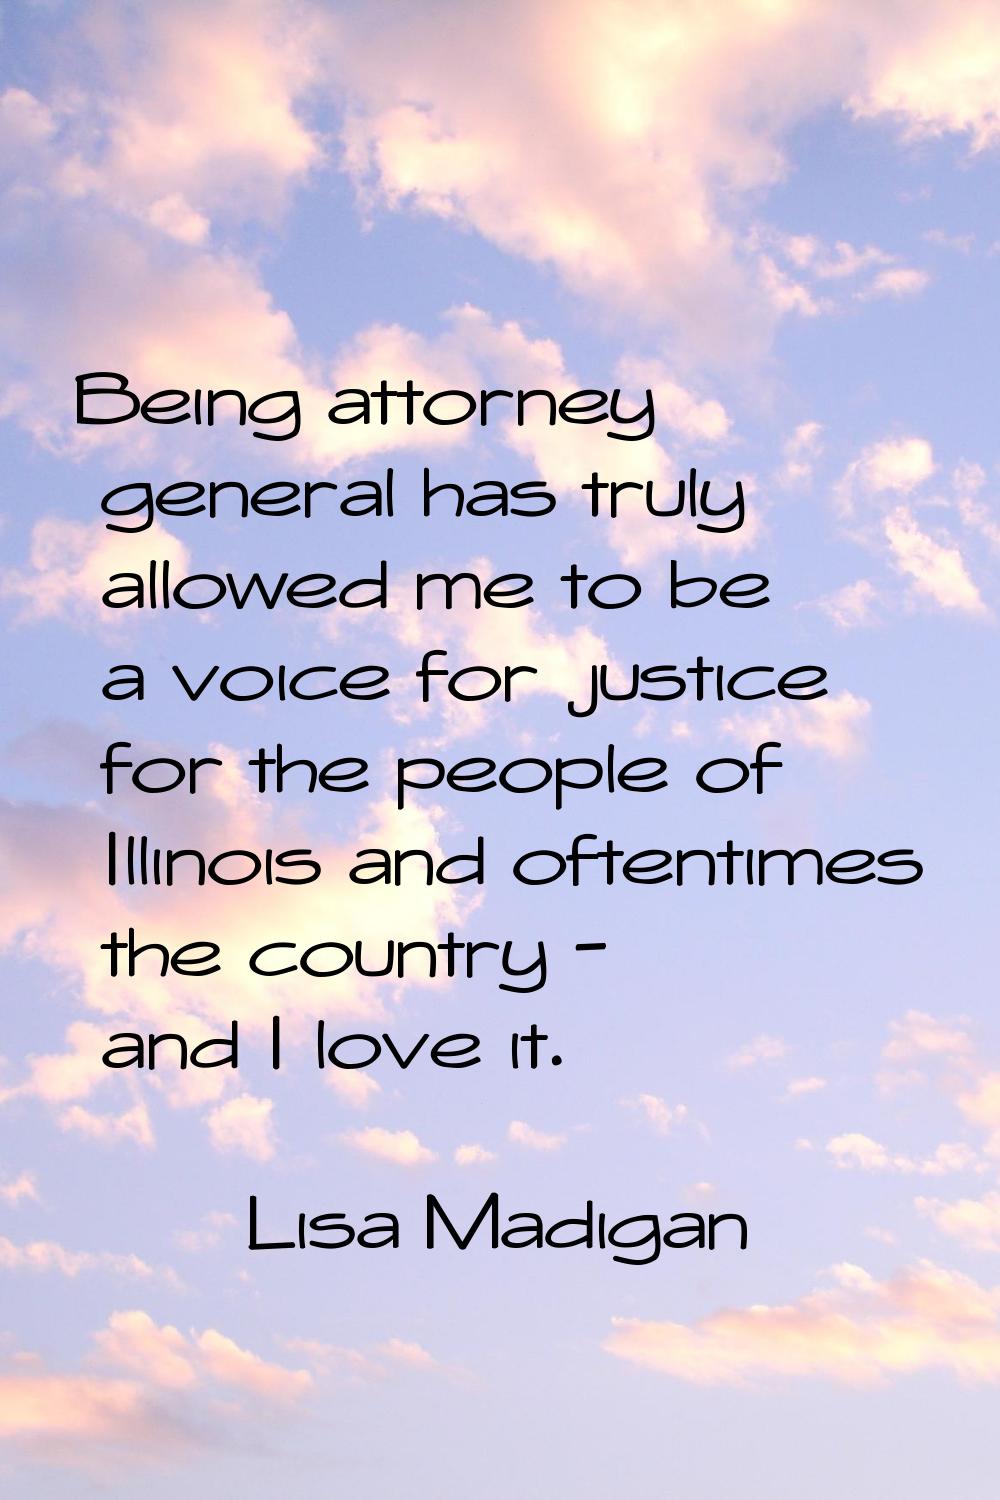 Being attorney general has truly allowed me to be a voice for justice for the people of Illinois an